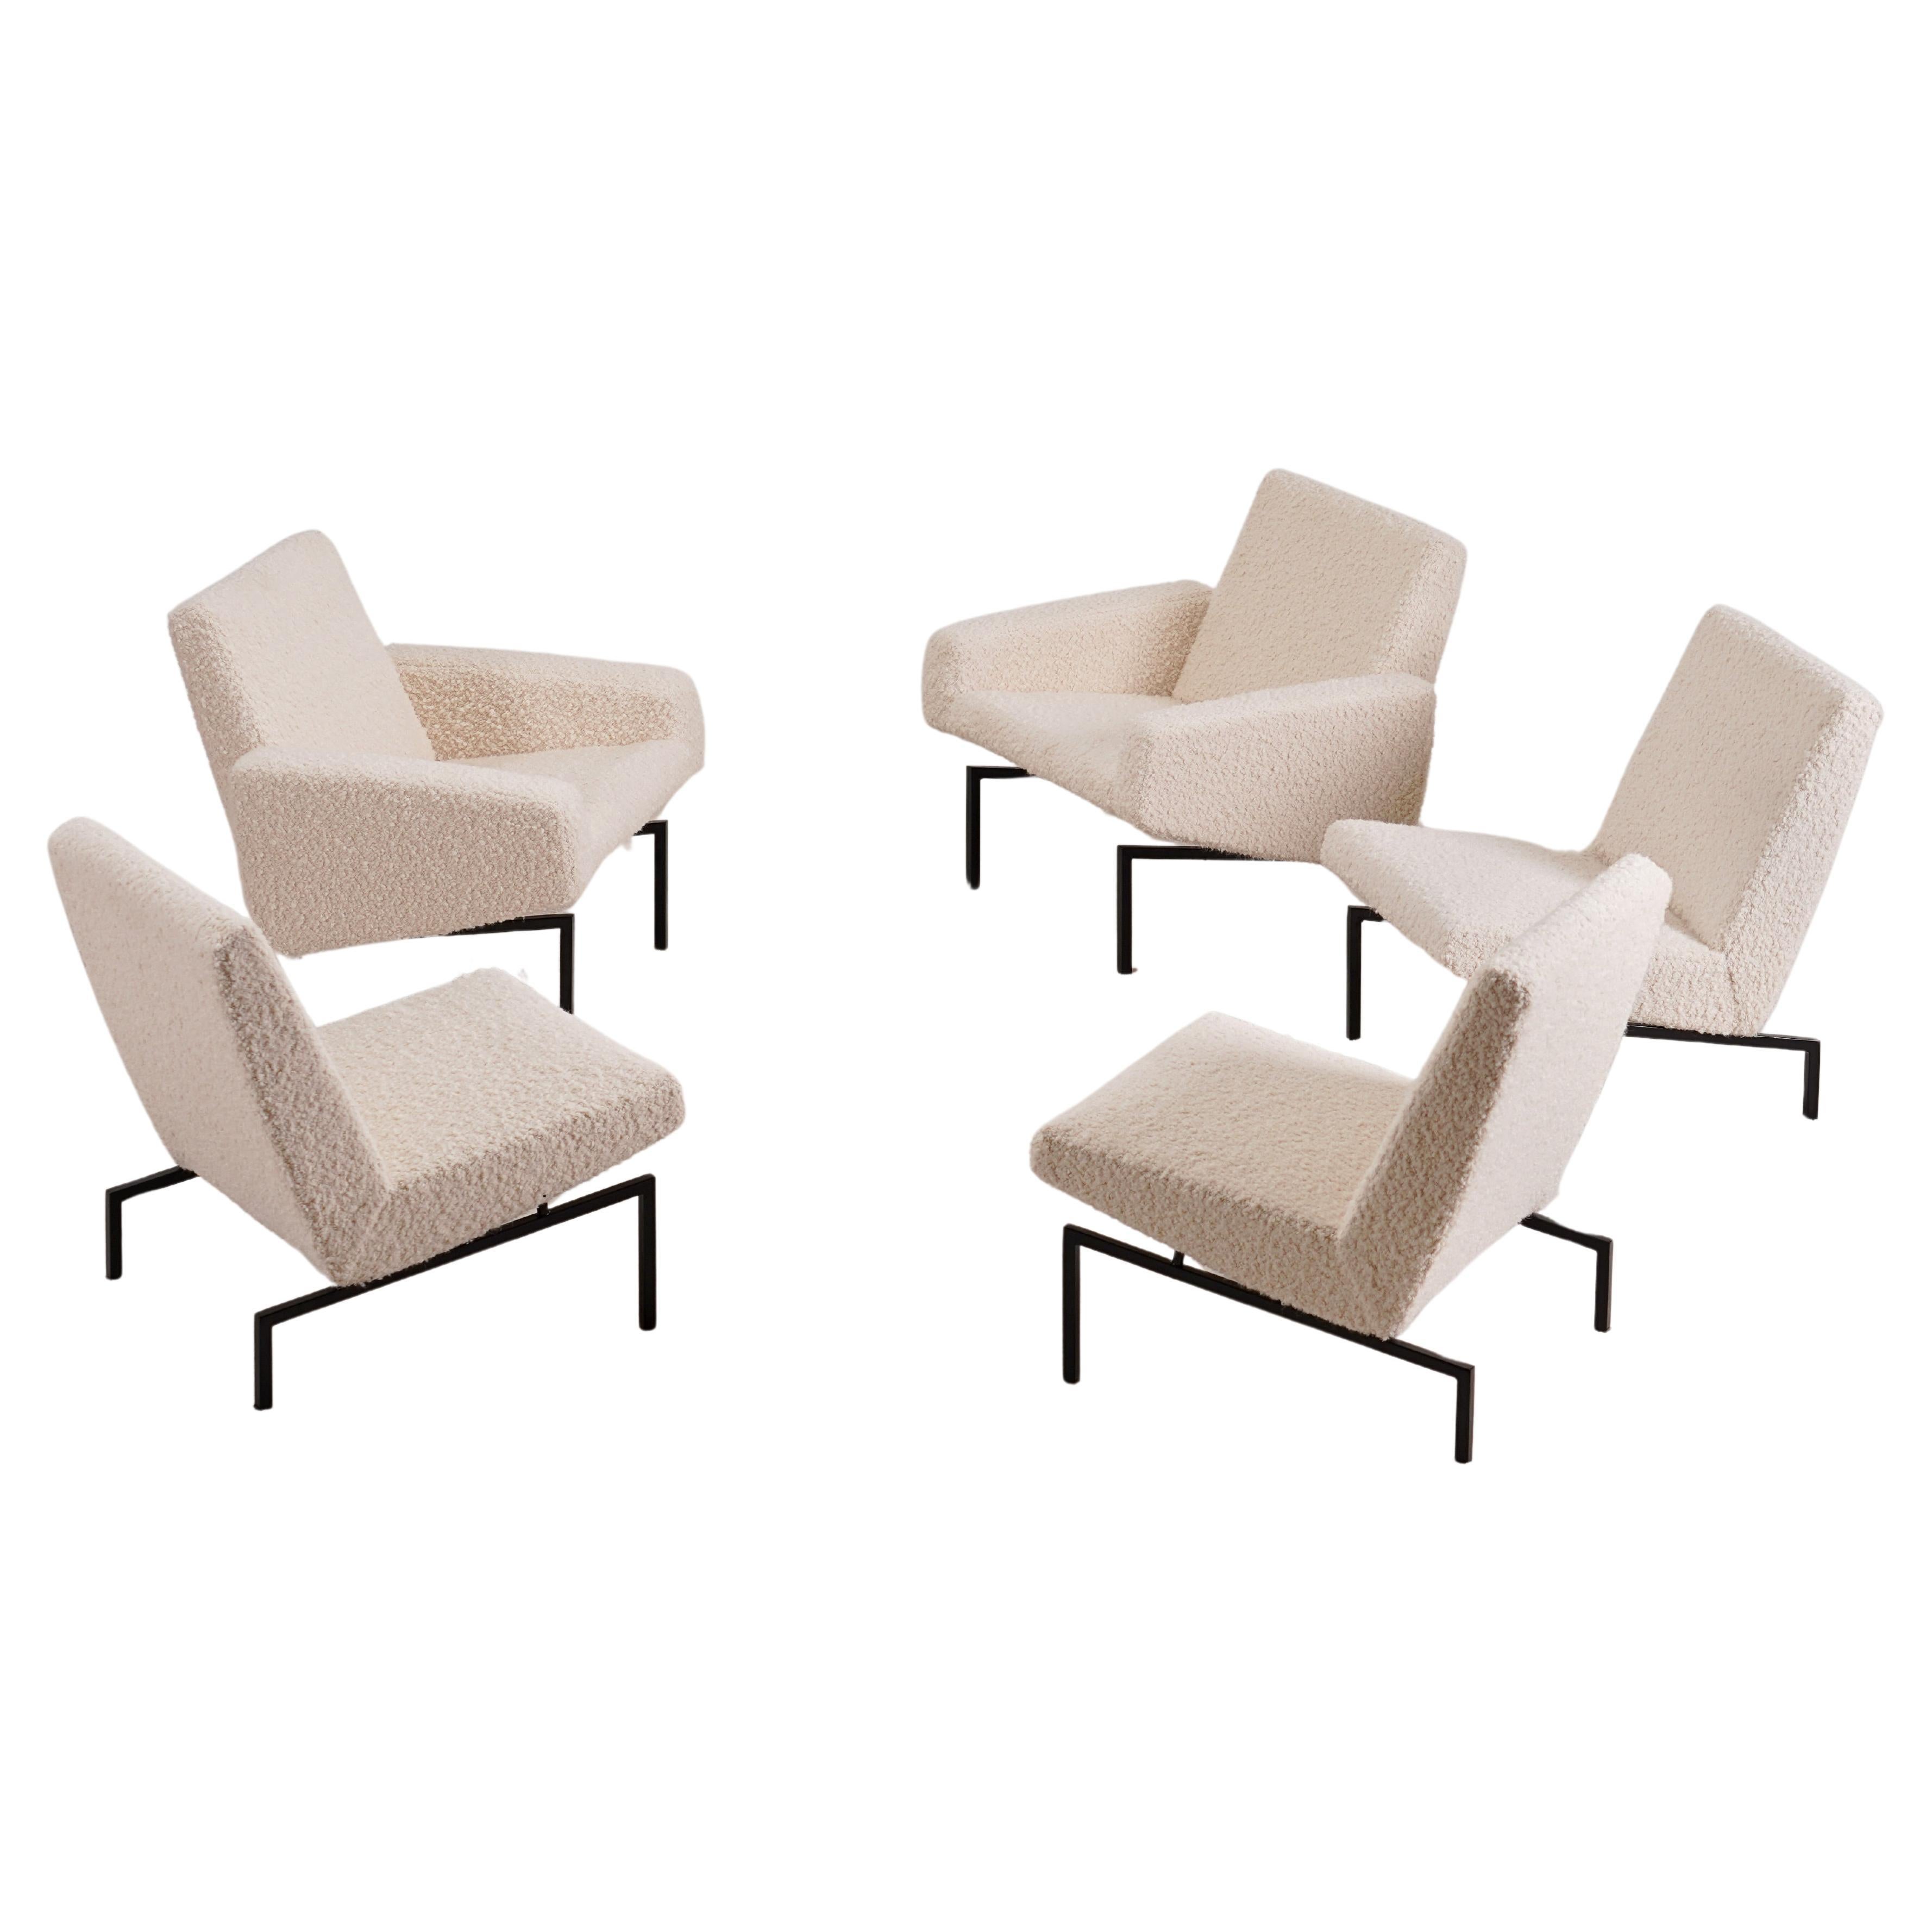 Joseph-André Motte, Rare Set of 5 "Tempo" Easy Chairs for Steiner, France, 1950 For Sale